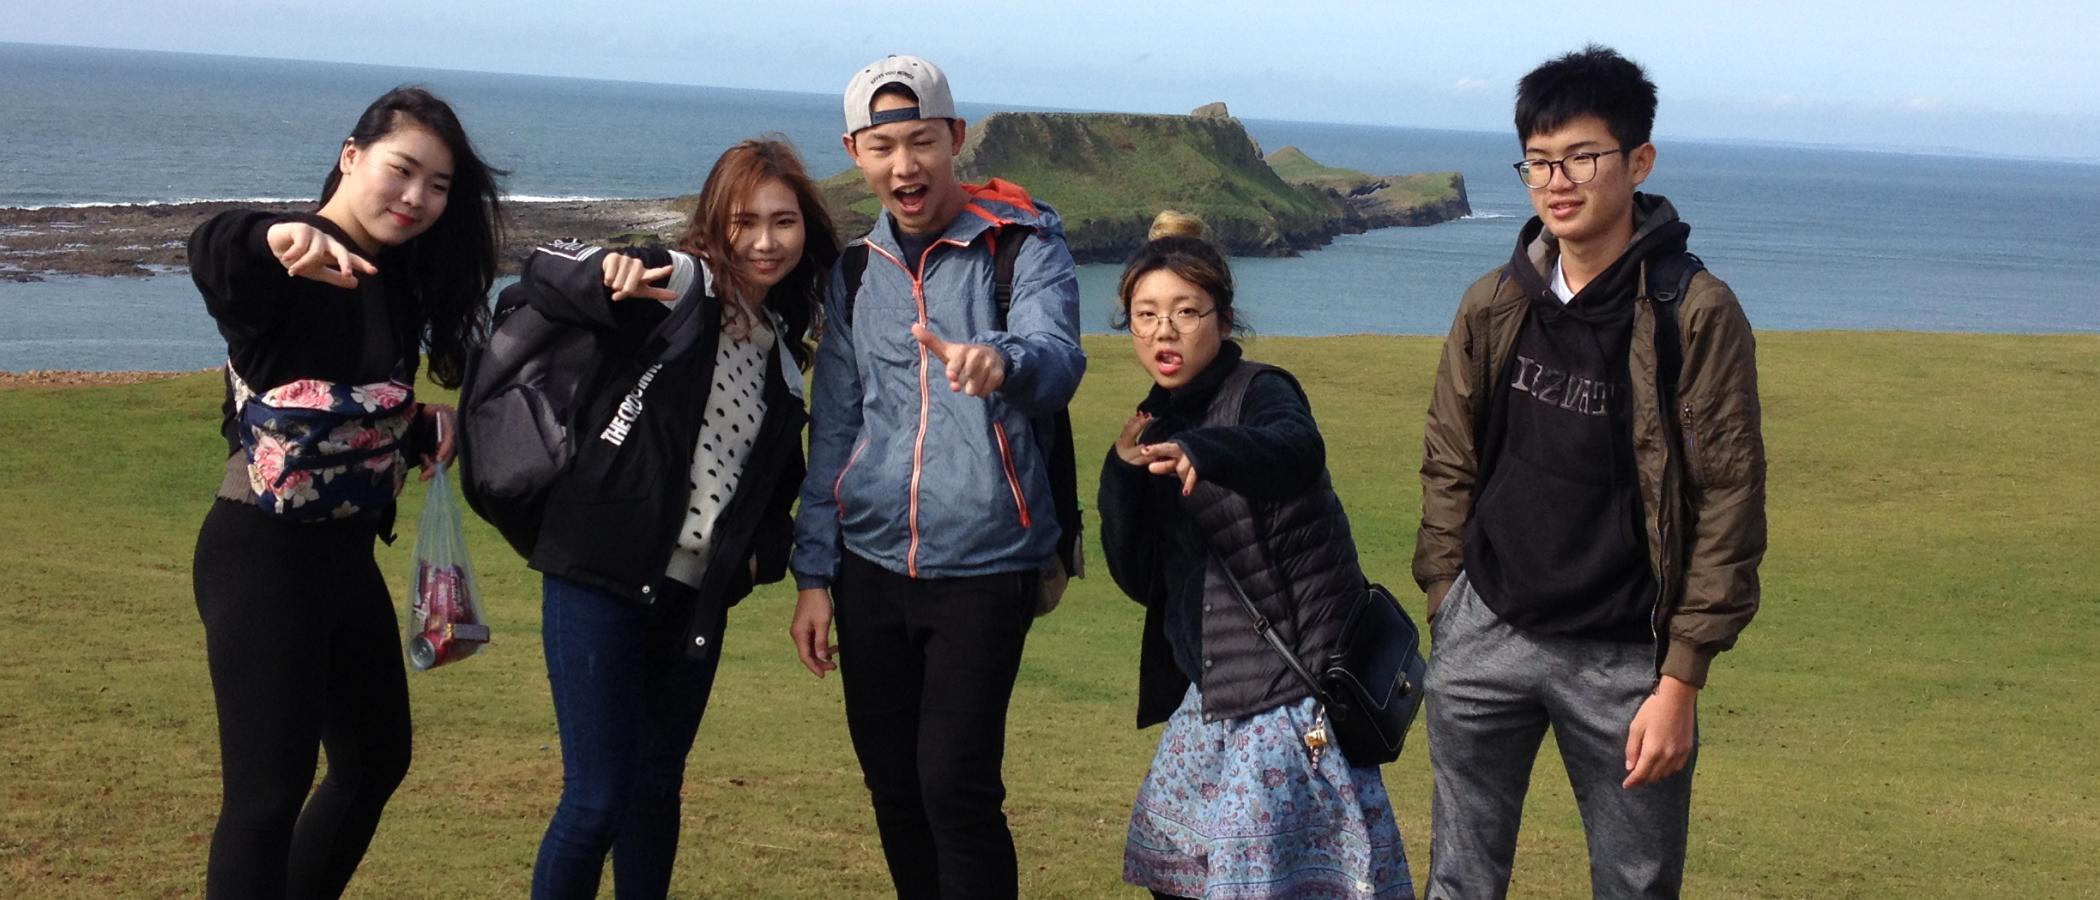 International students enjoy a day out at Rhossili Bay